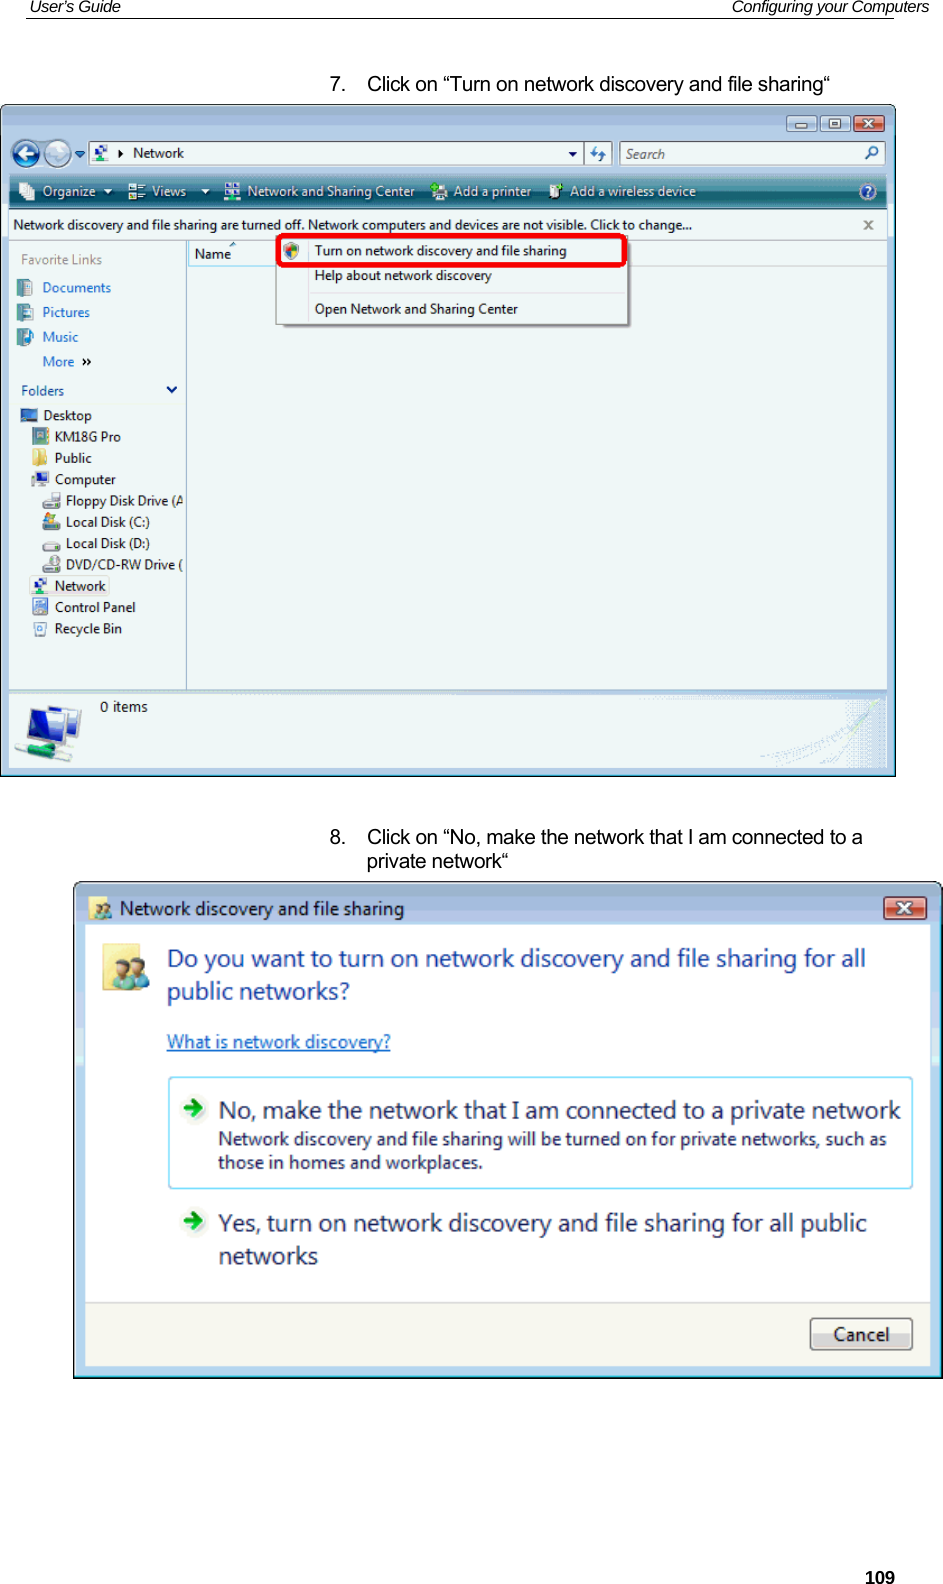 User’s Guide   Configuring your Computers  1097.  Click on “Turn on network discovery and file sharing“   8.  Click on “No, make the network that I am connected to a private network“      